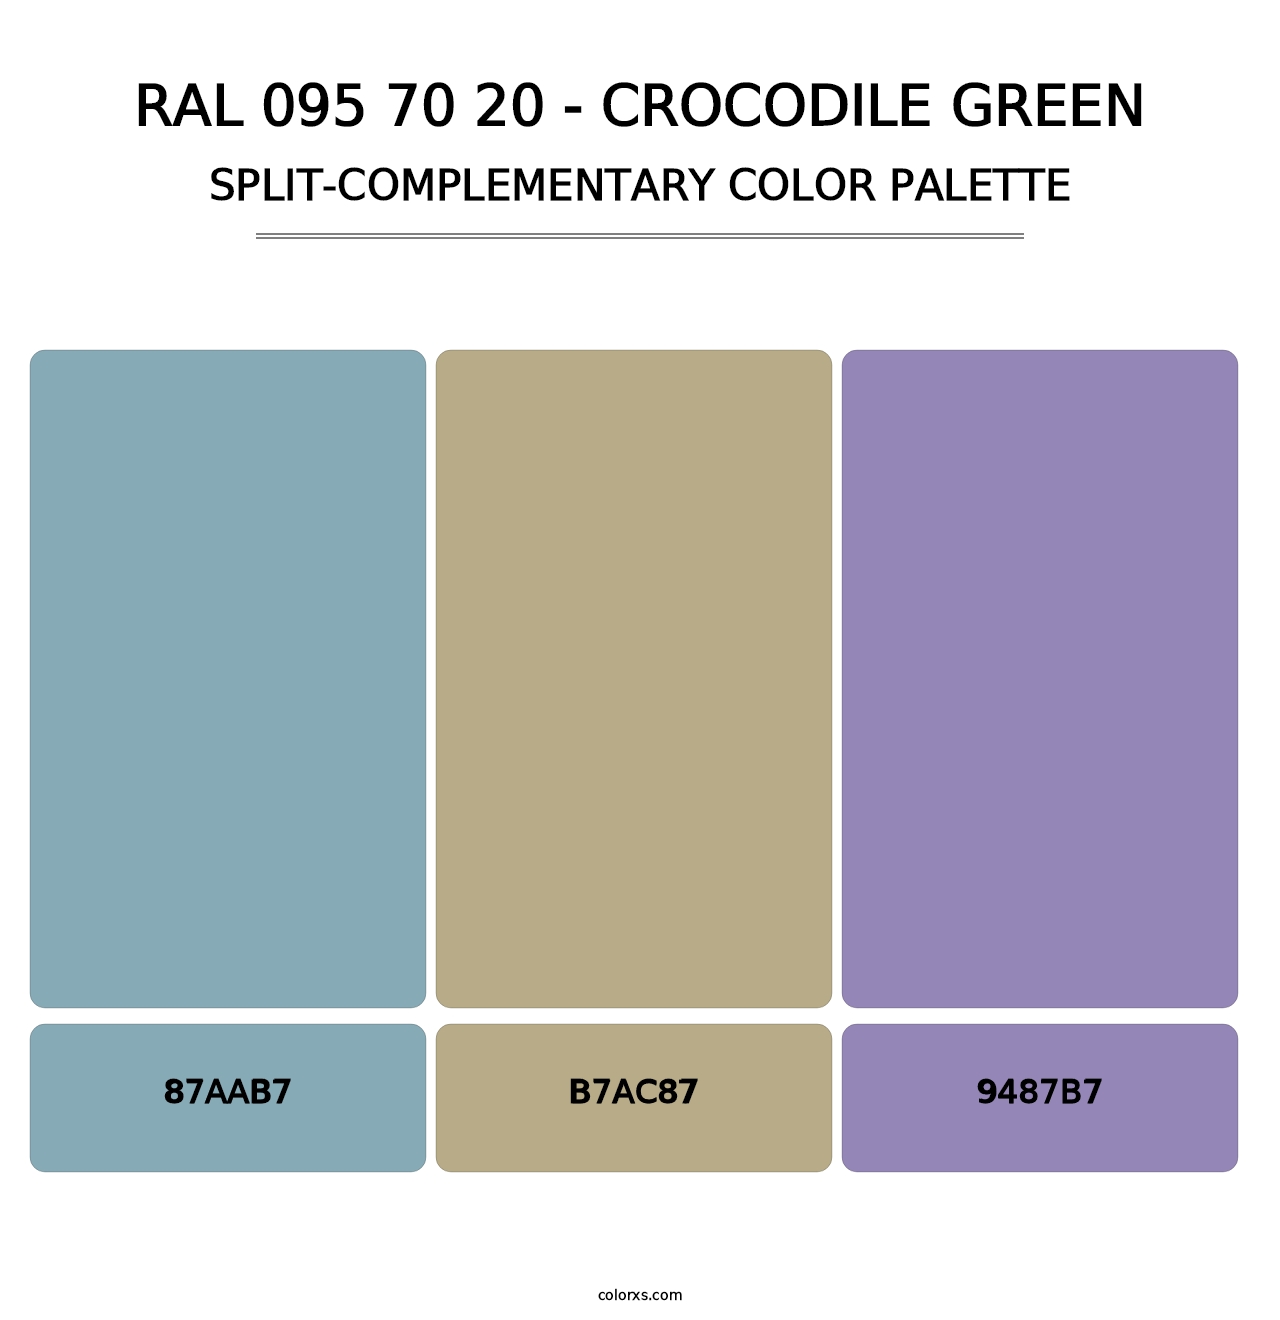 RAL 095 70 20 - Crocodile Green - Split-Complementary Color Palette